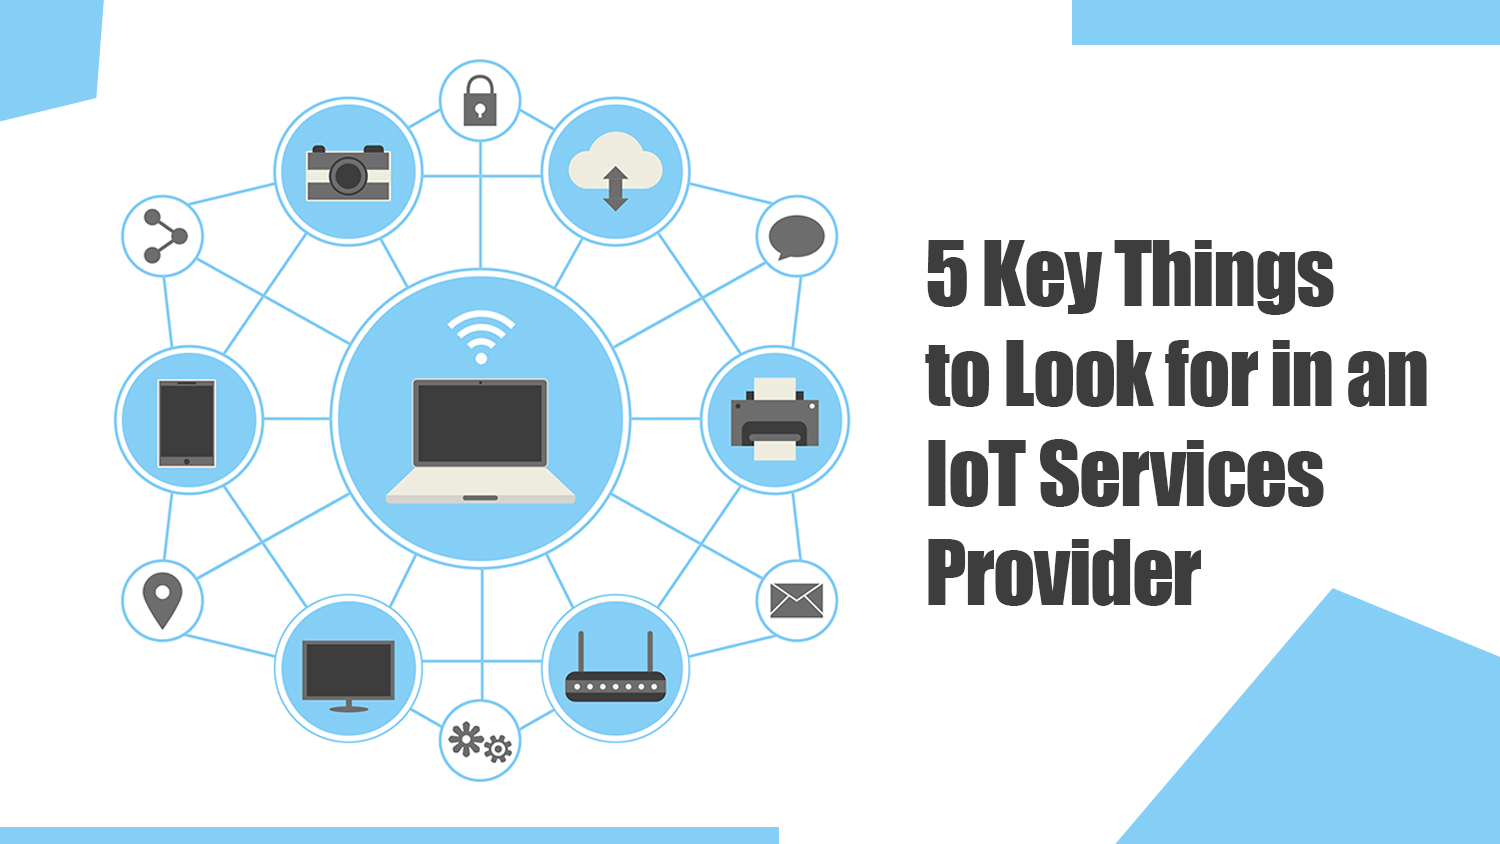 Looking for an IoT Services Provider: Things to know